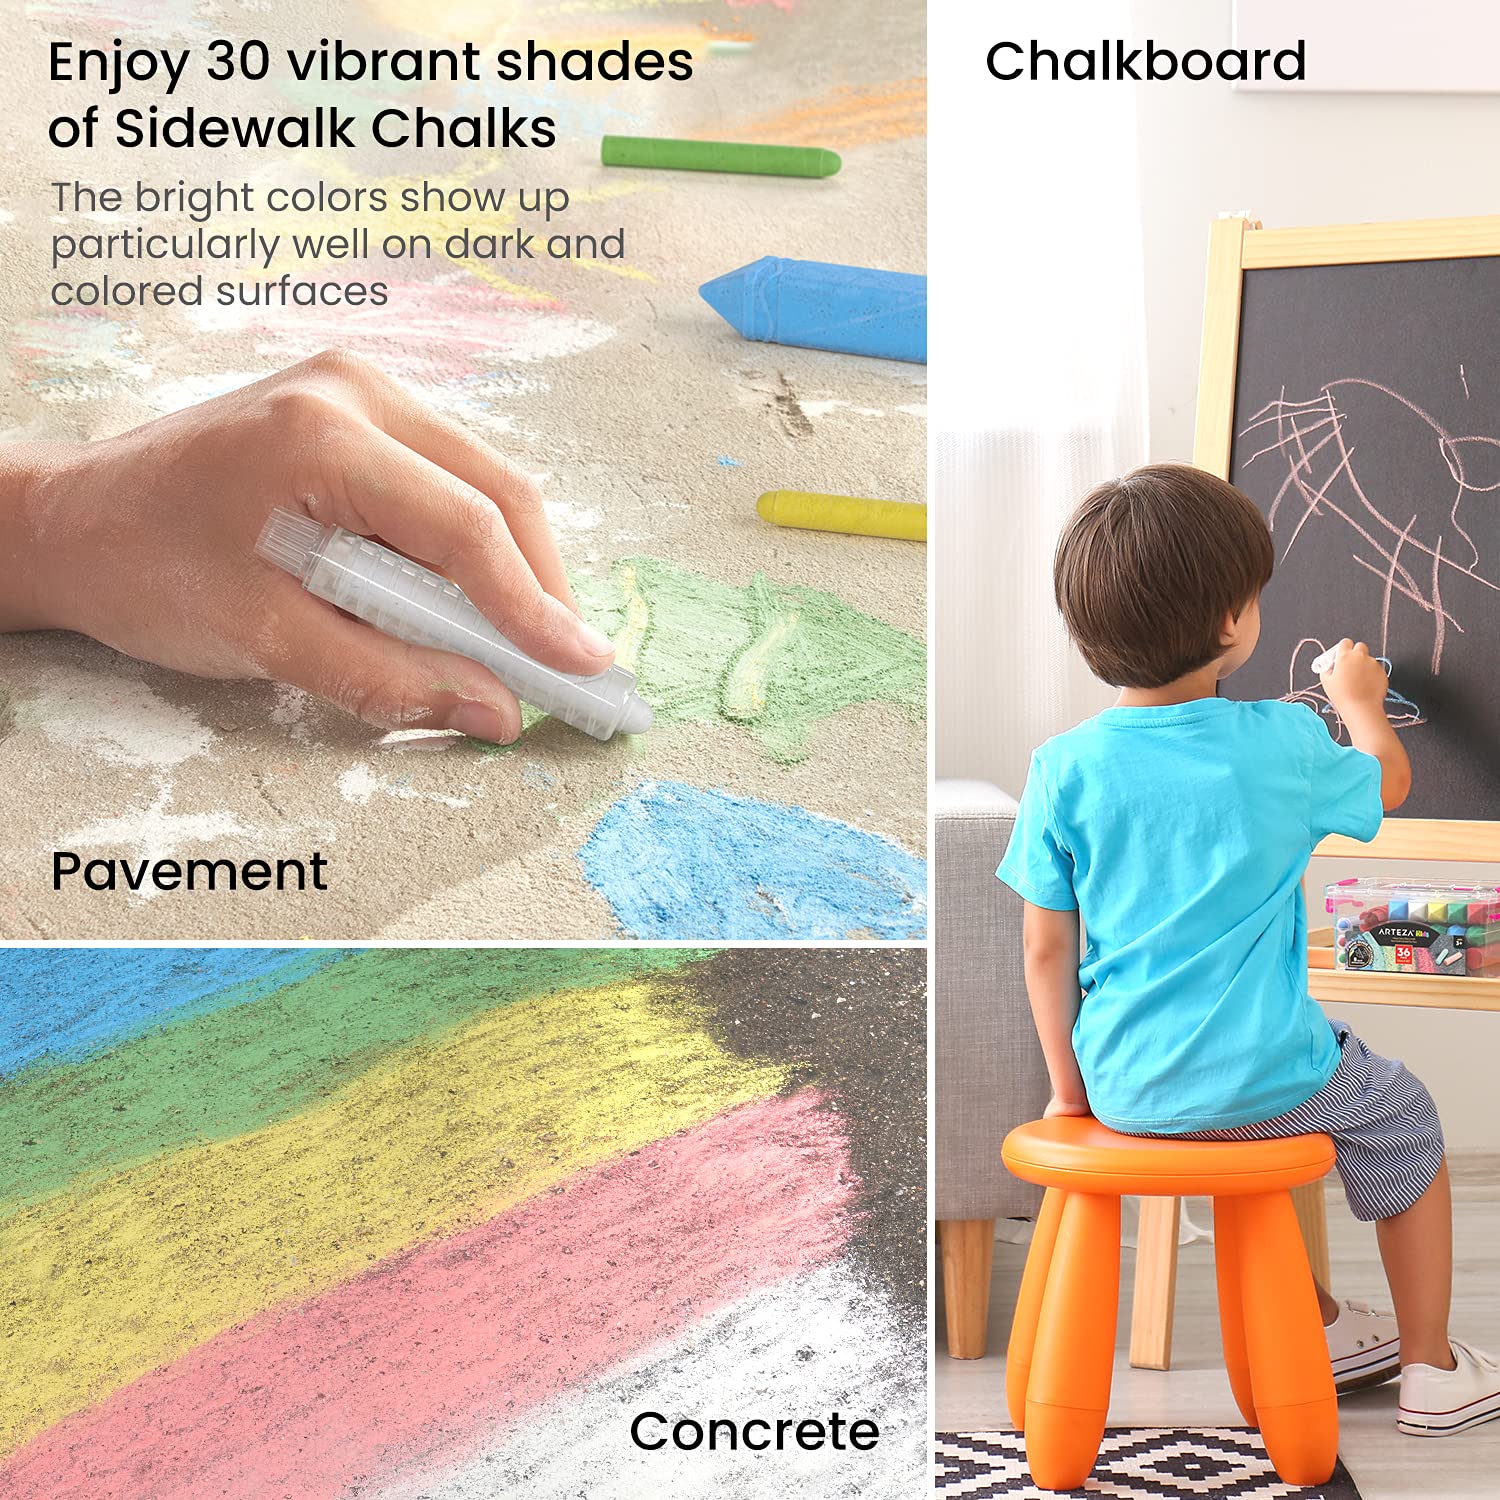 Arteza Kids Sidewalk Chalk, Set of 36 Pieces, Easy-to-Hold Handmade Washable Chalk with a Game Guide, Art Supplies for Outdoors, Spring and Summer Activities, and Chalkboard Art